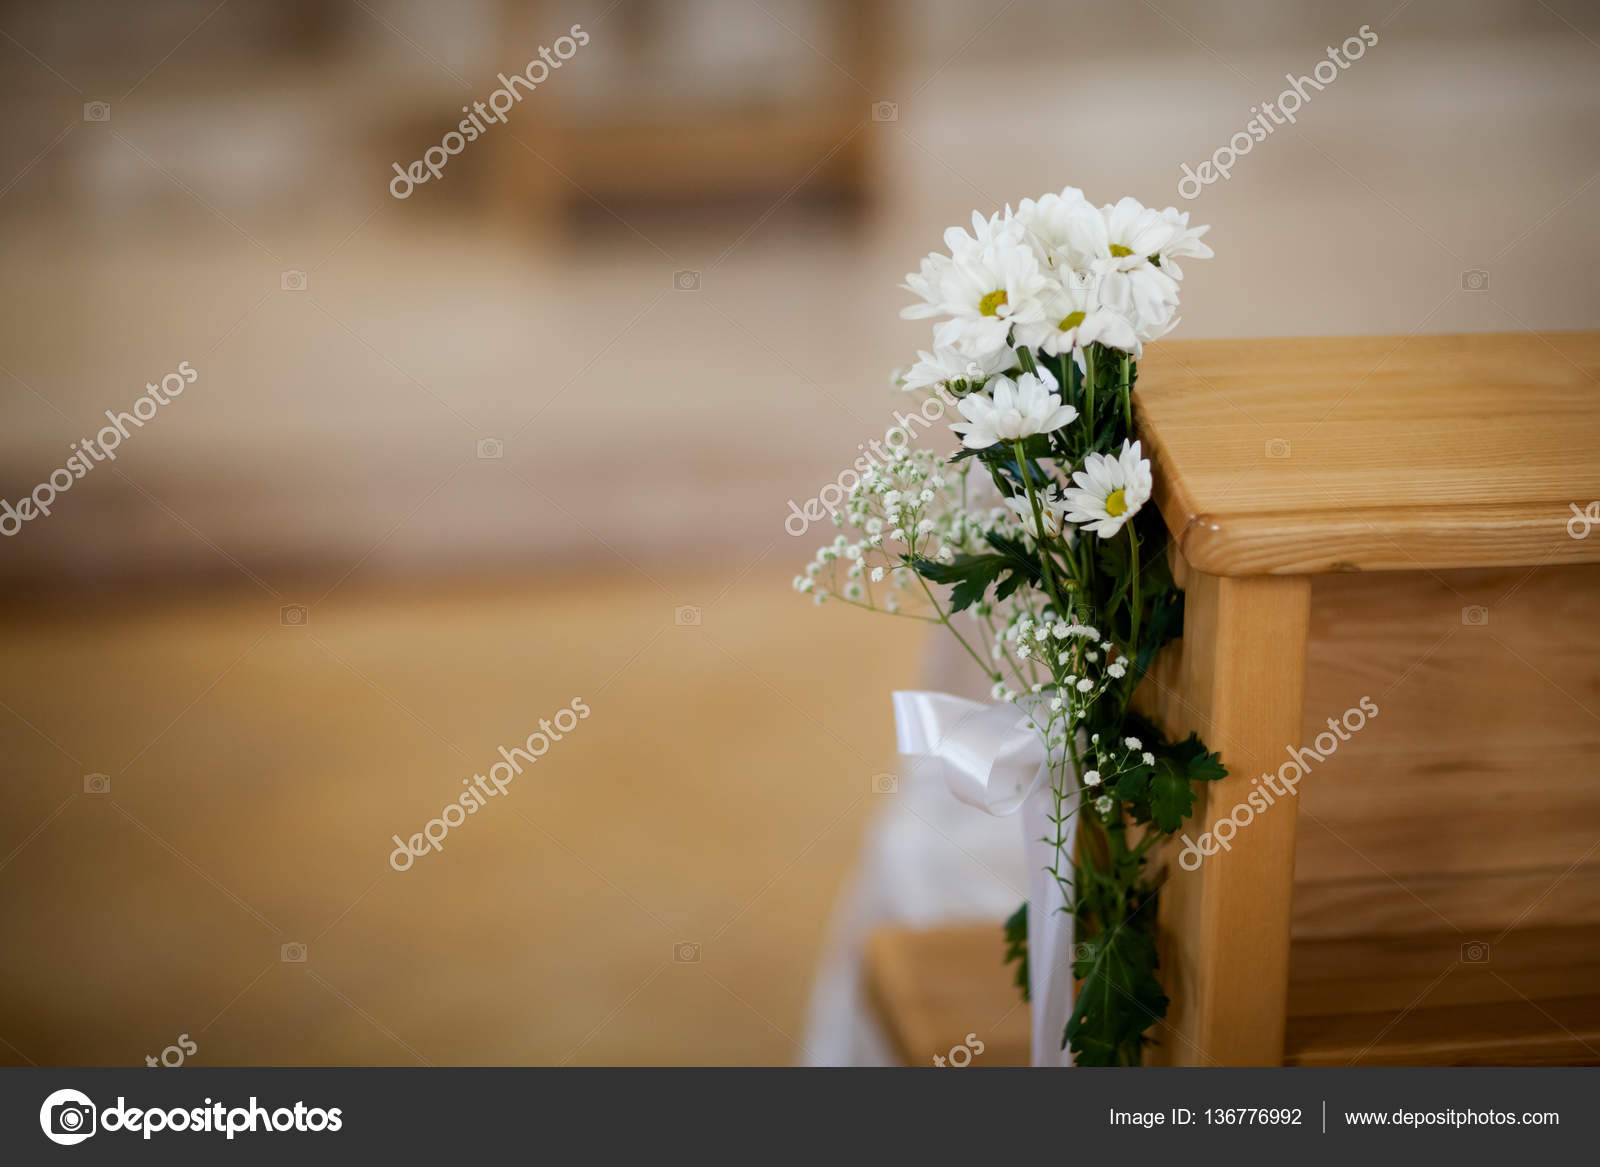 Beautiful Church Decorated For Wedding Ceremony Stock Photo